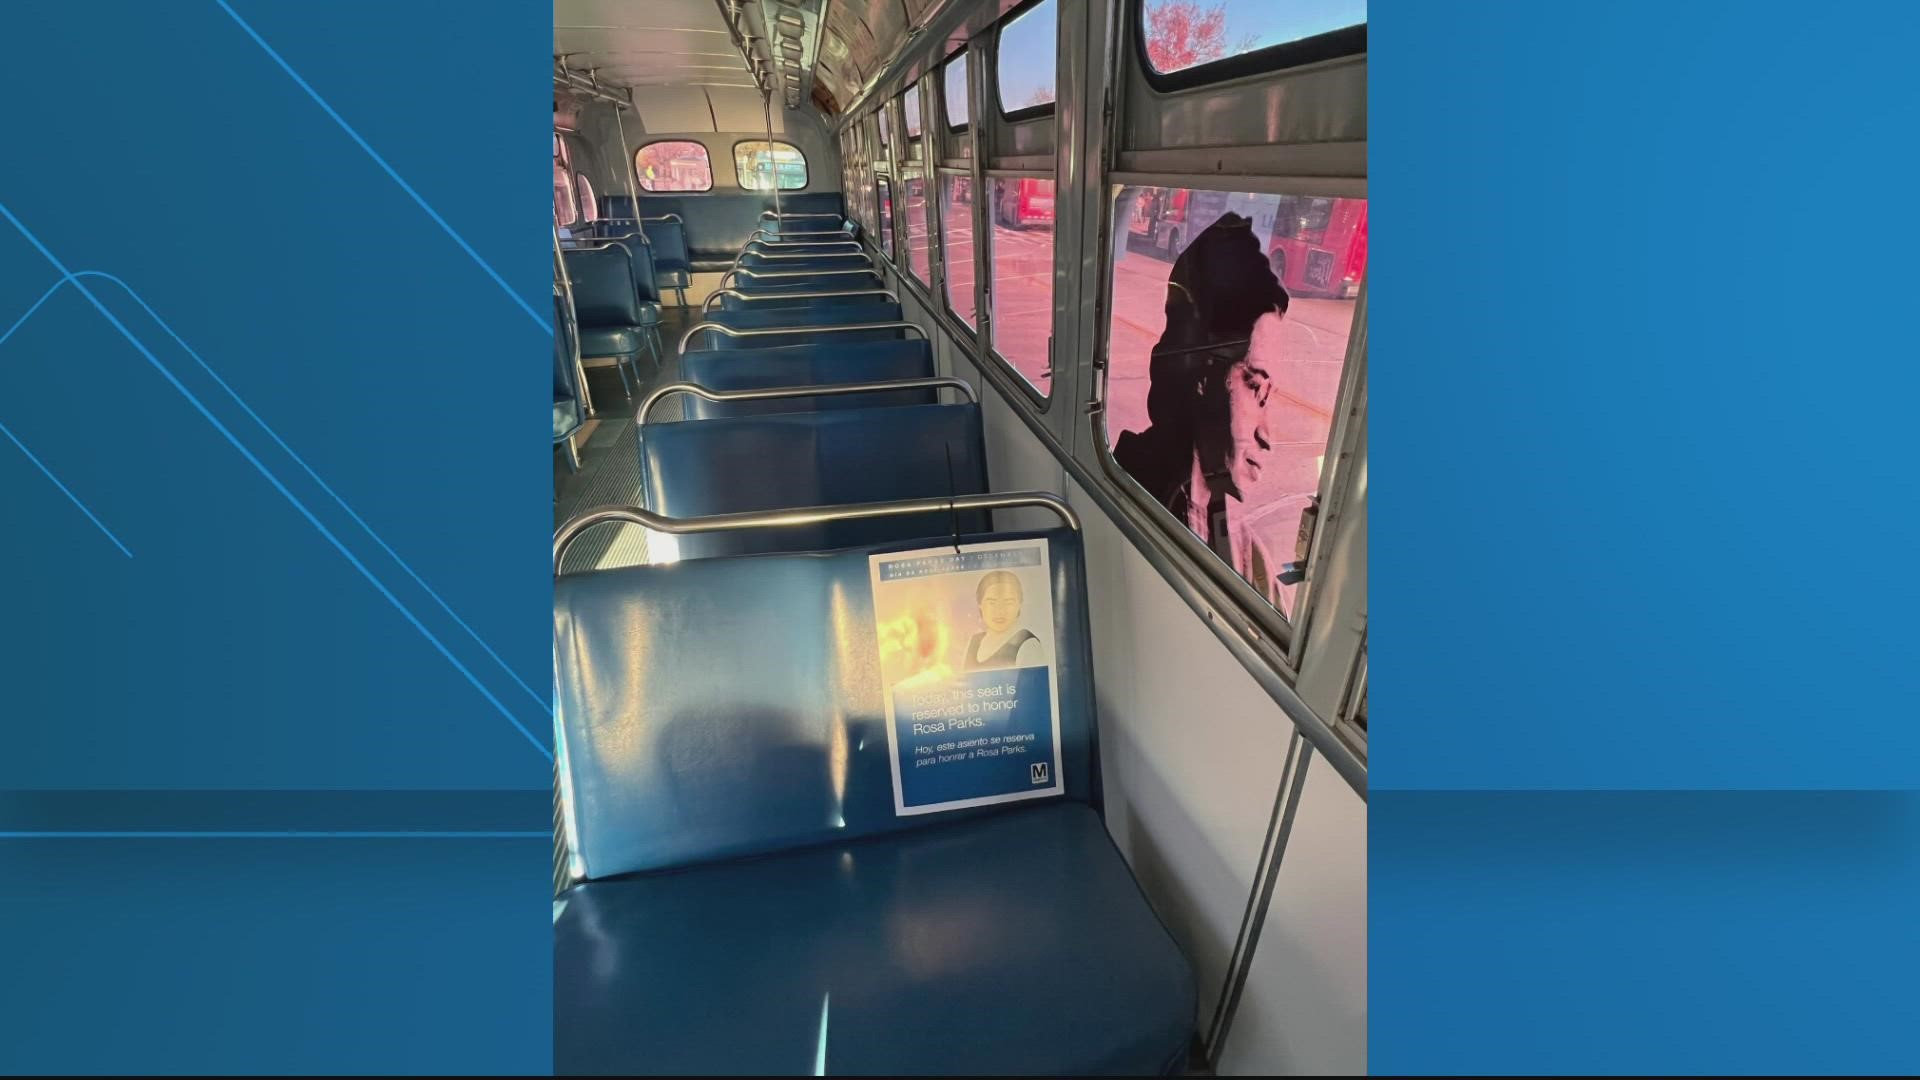 WMATA is paying tribute to the legacy and courage of civil rights icon Rosa Parks with commemorative seats reserved in her honor